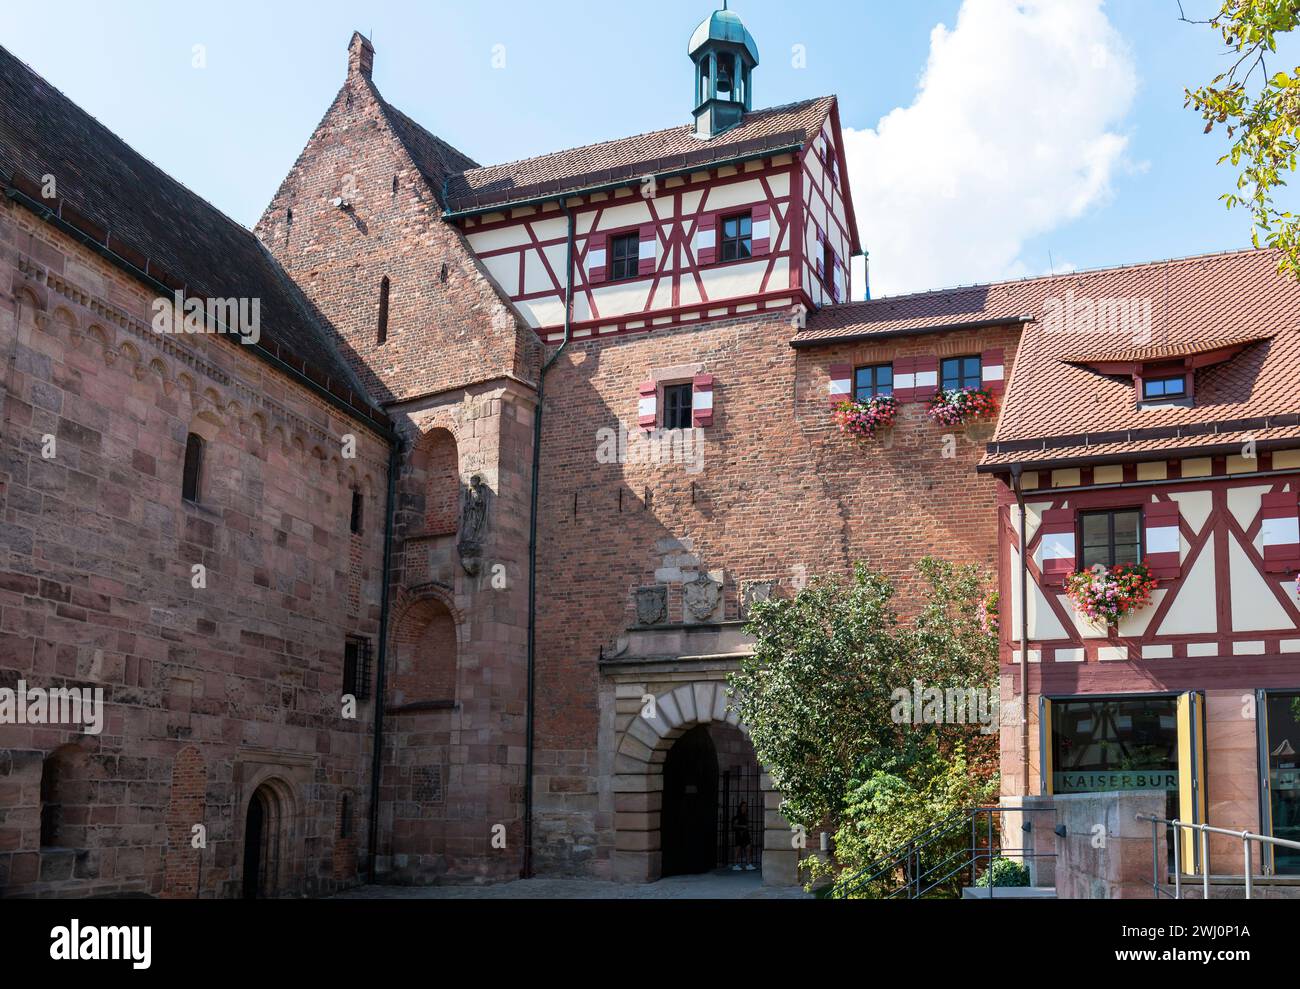 Nuremberg old town, palace of the imperial castle Stock Photo